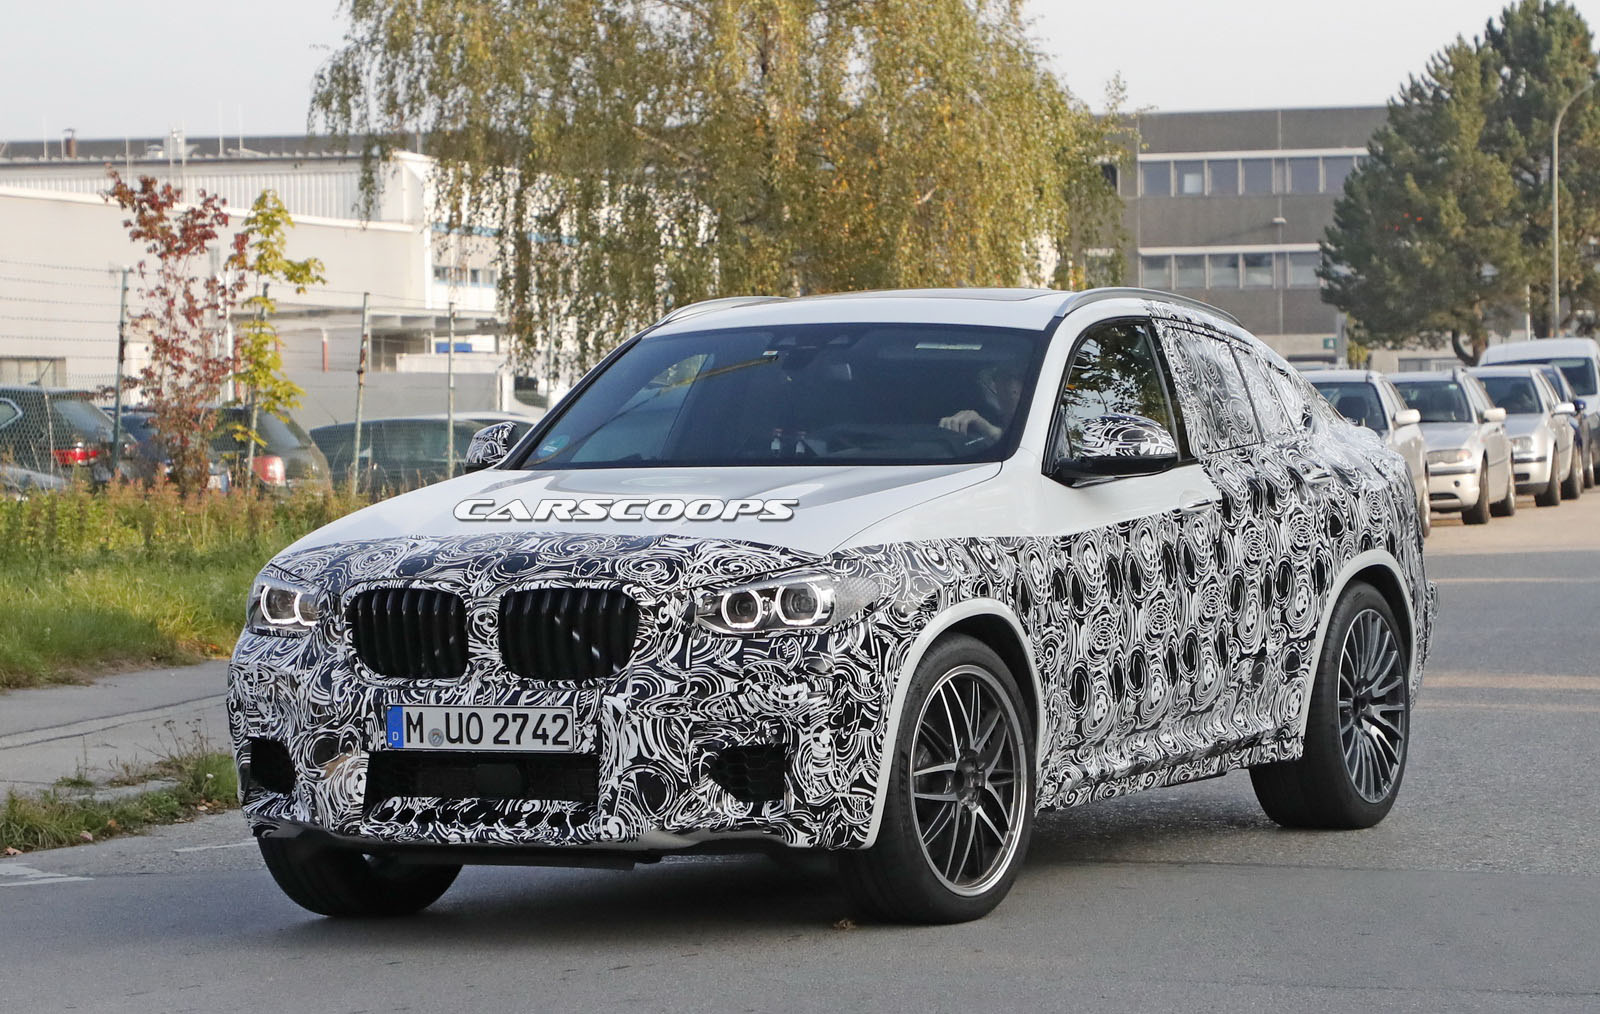 Spy Shots: This Is the New 2019 BMW X4 M SUV